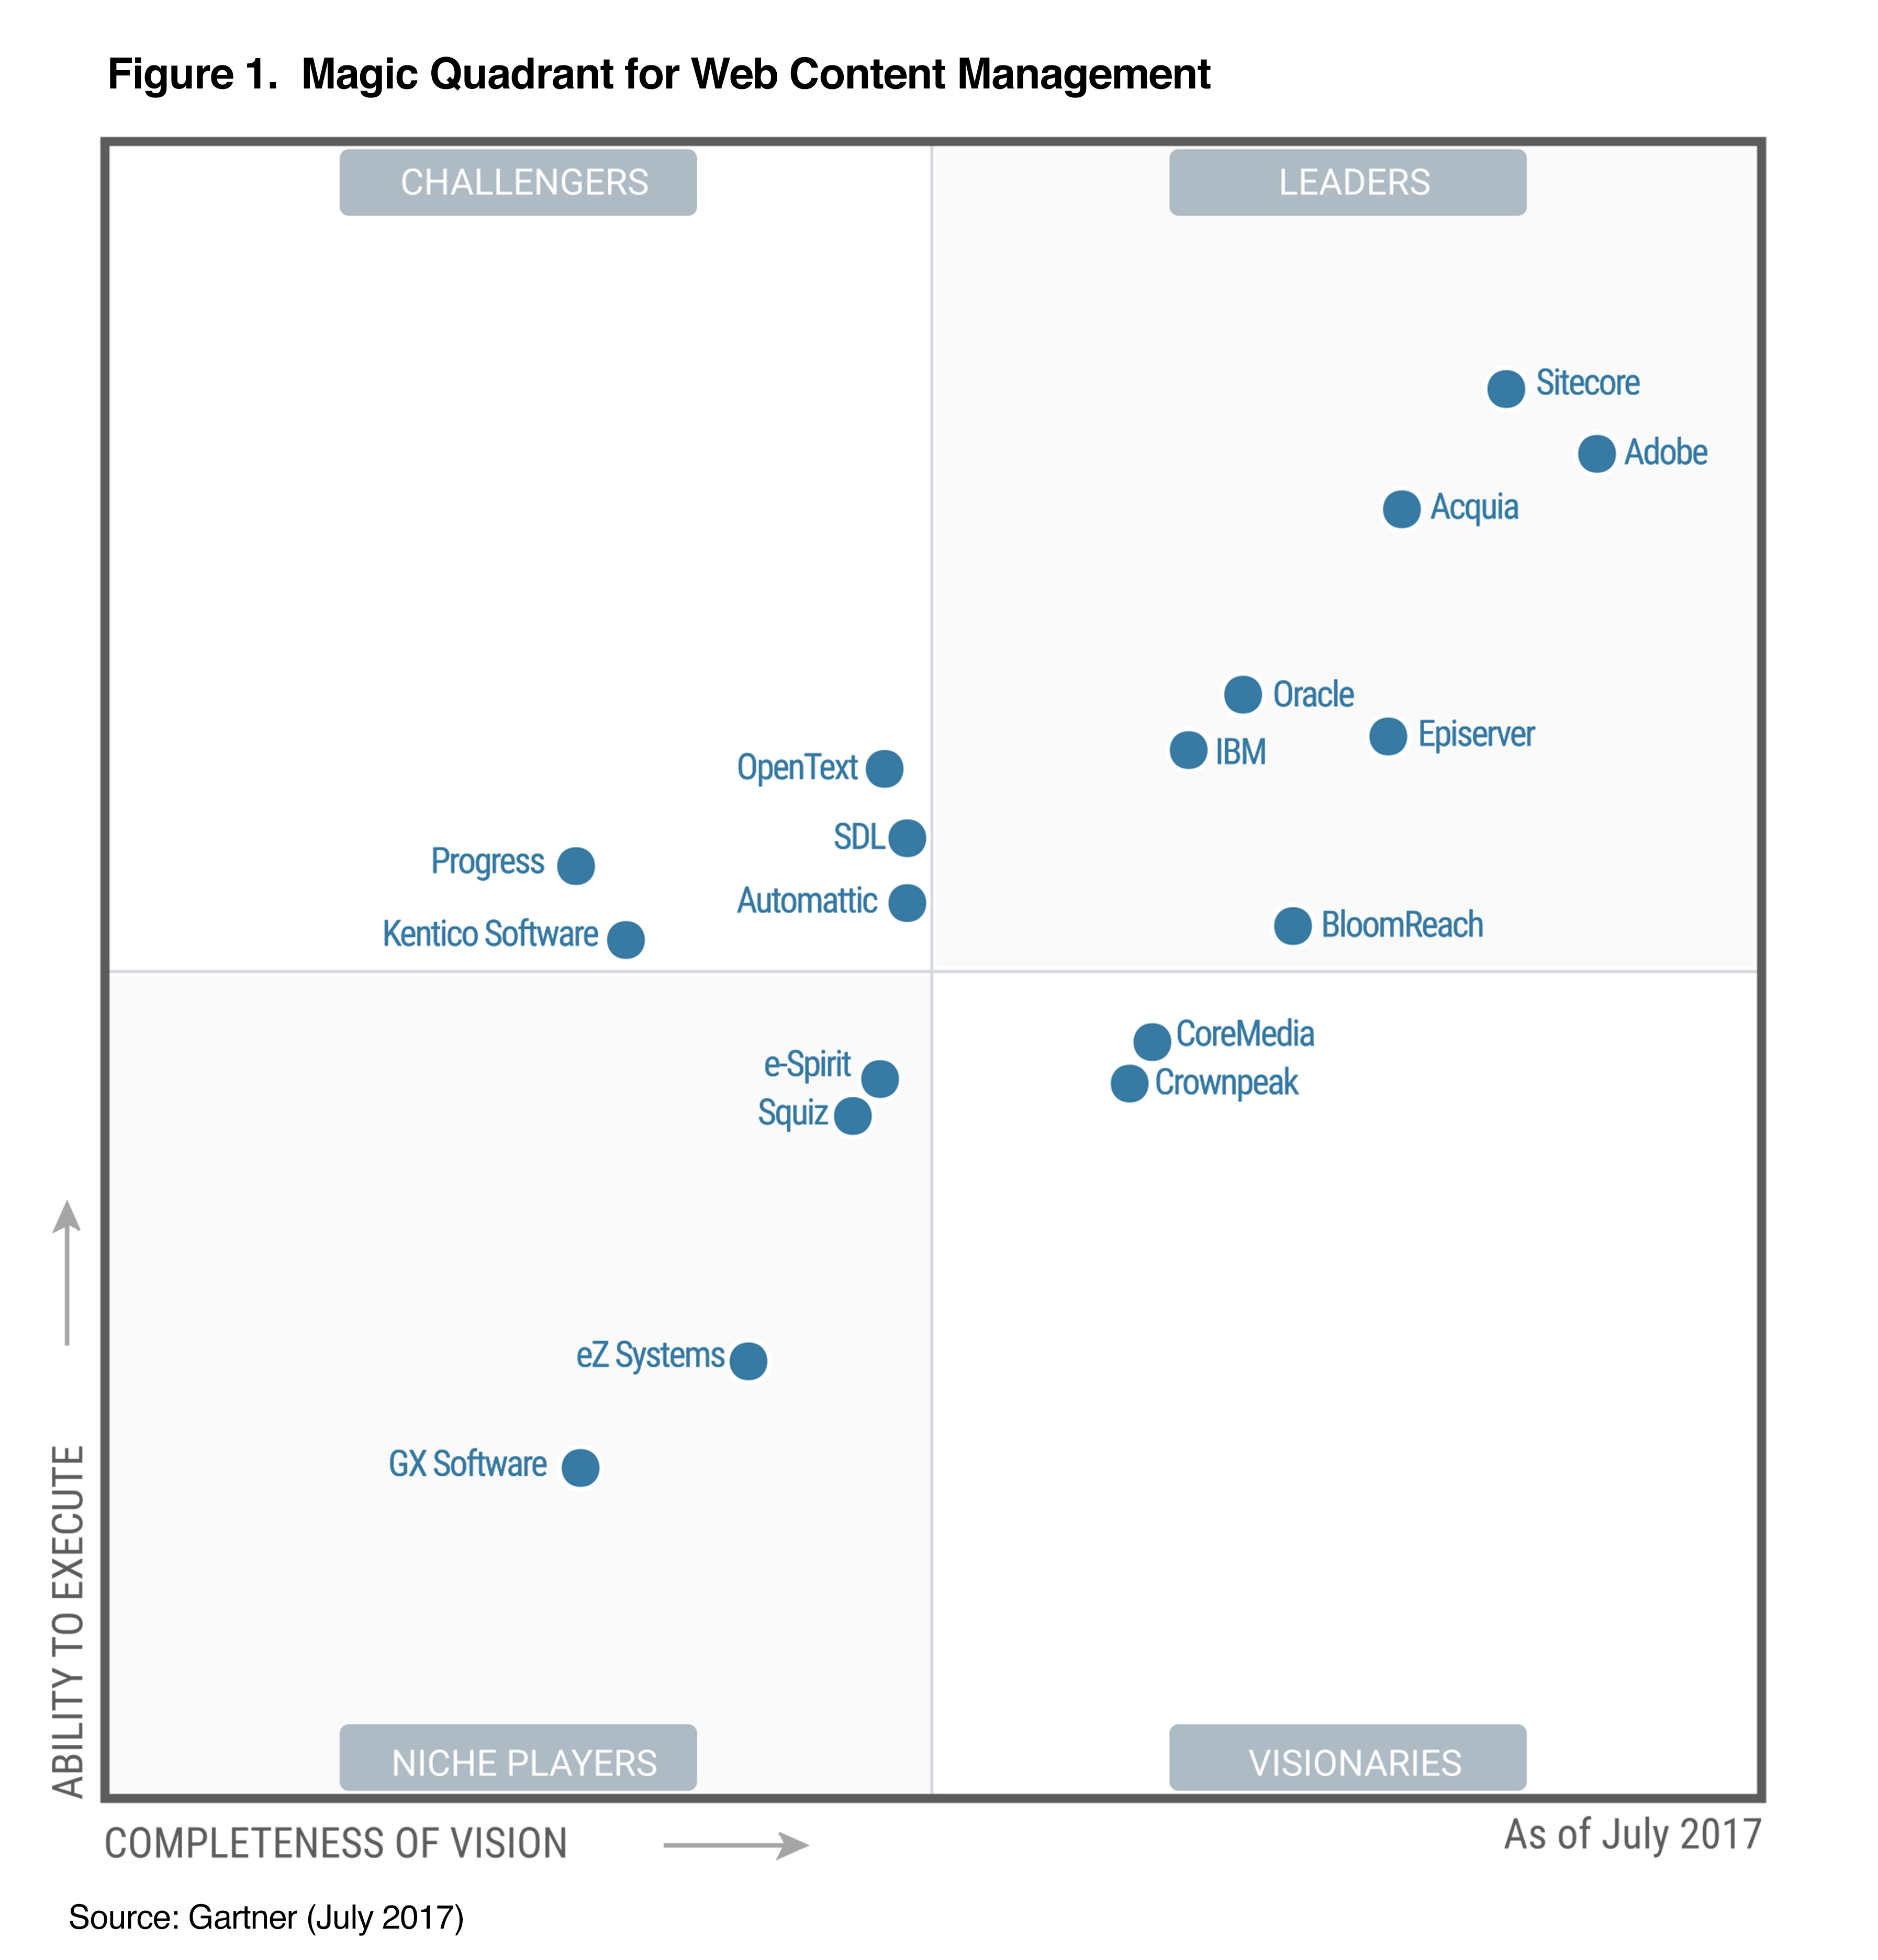 A graph showing the state of the Web Content Management market in 2017. Vendors are plotted on a grid based on their ability to execute and completeness of vision. Acquia is placed in the 'Leaders' quadrant, indicating strong performance in both vision and execution.